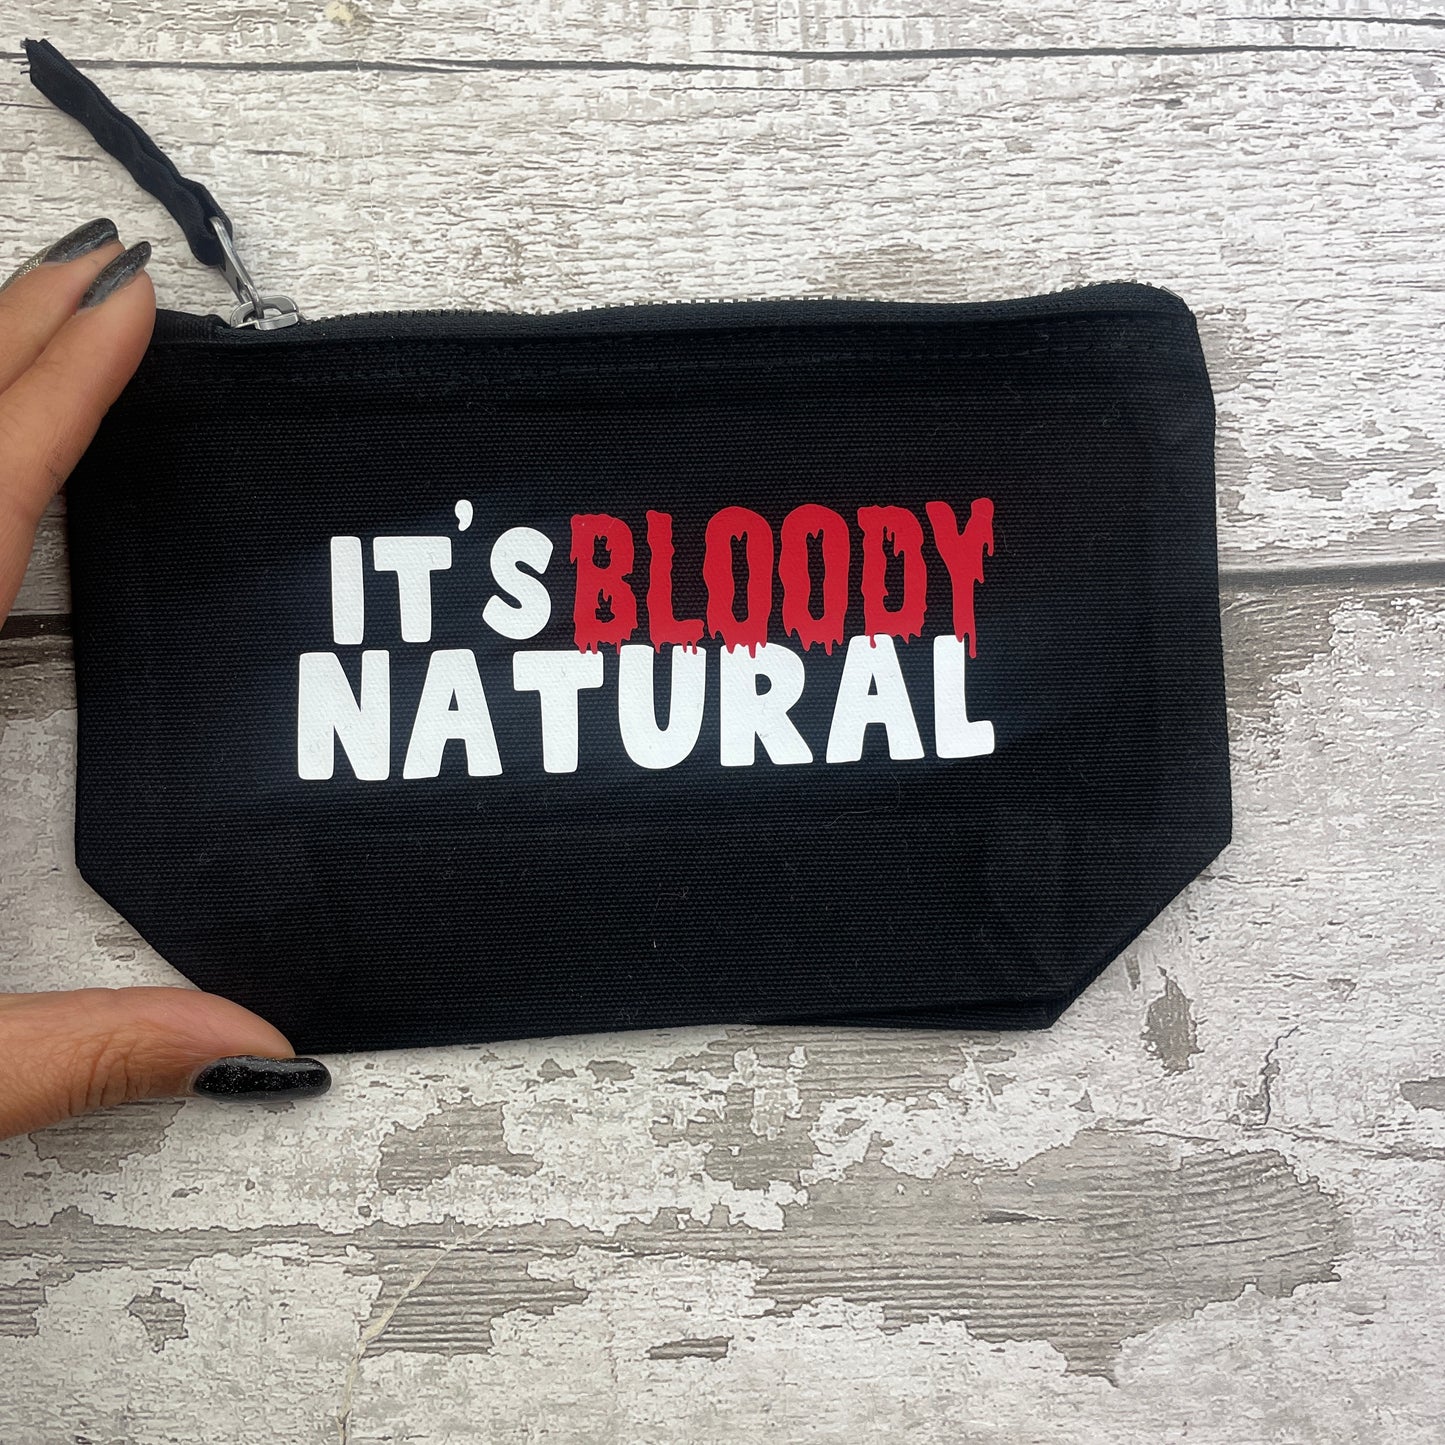 It's Bloody Natural  - Tampon, pad, sanitary bag / Period Pouch